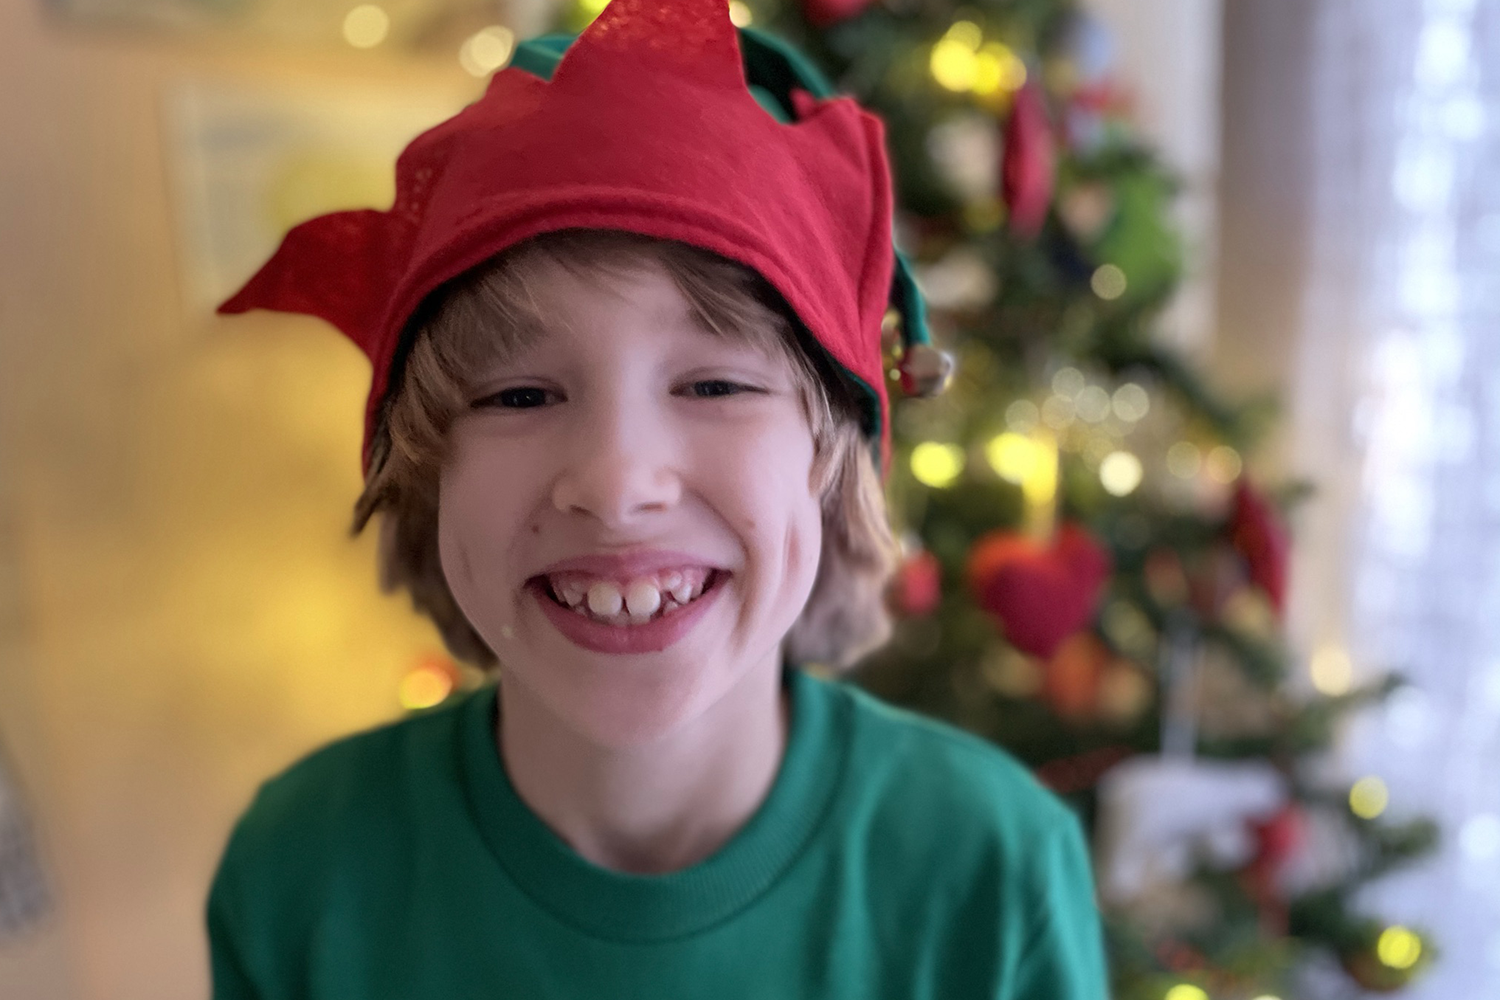 Toby wearing an elf hat in front of the Christmas tree